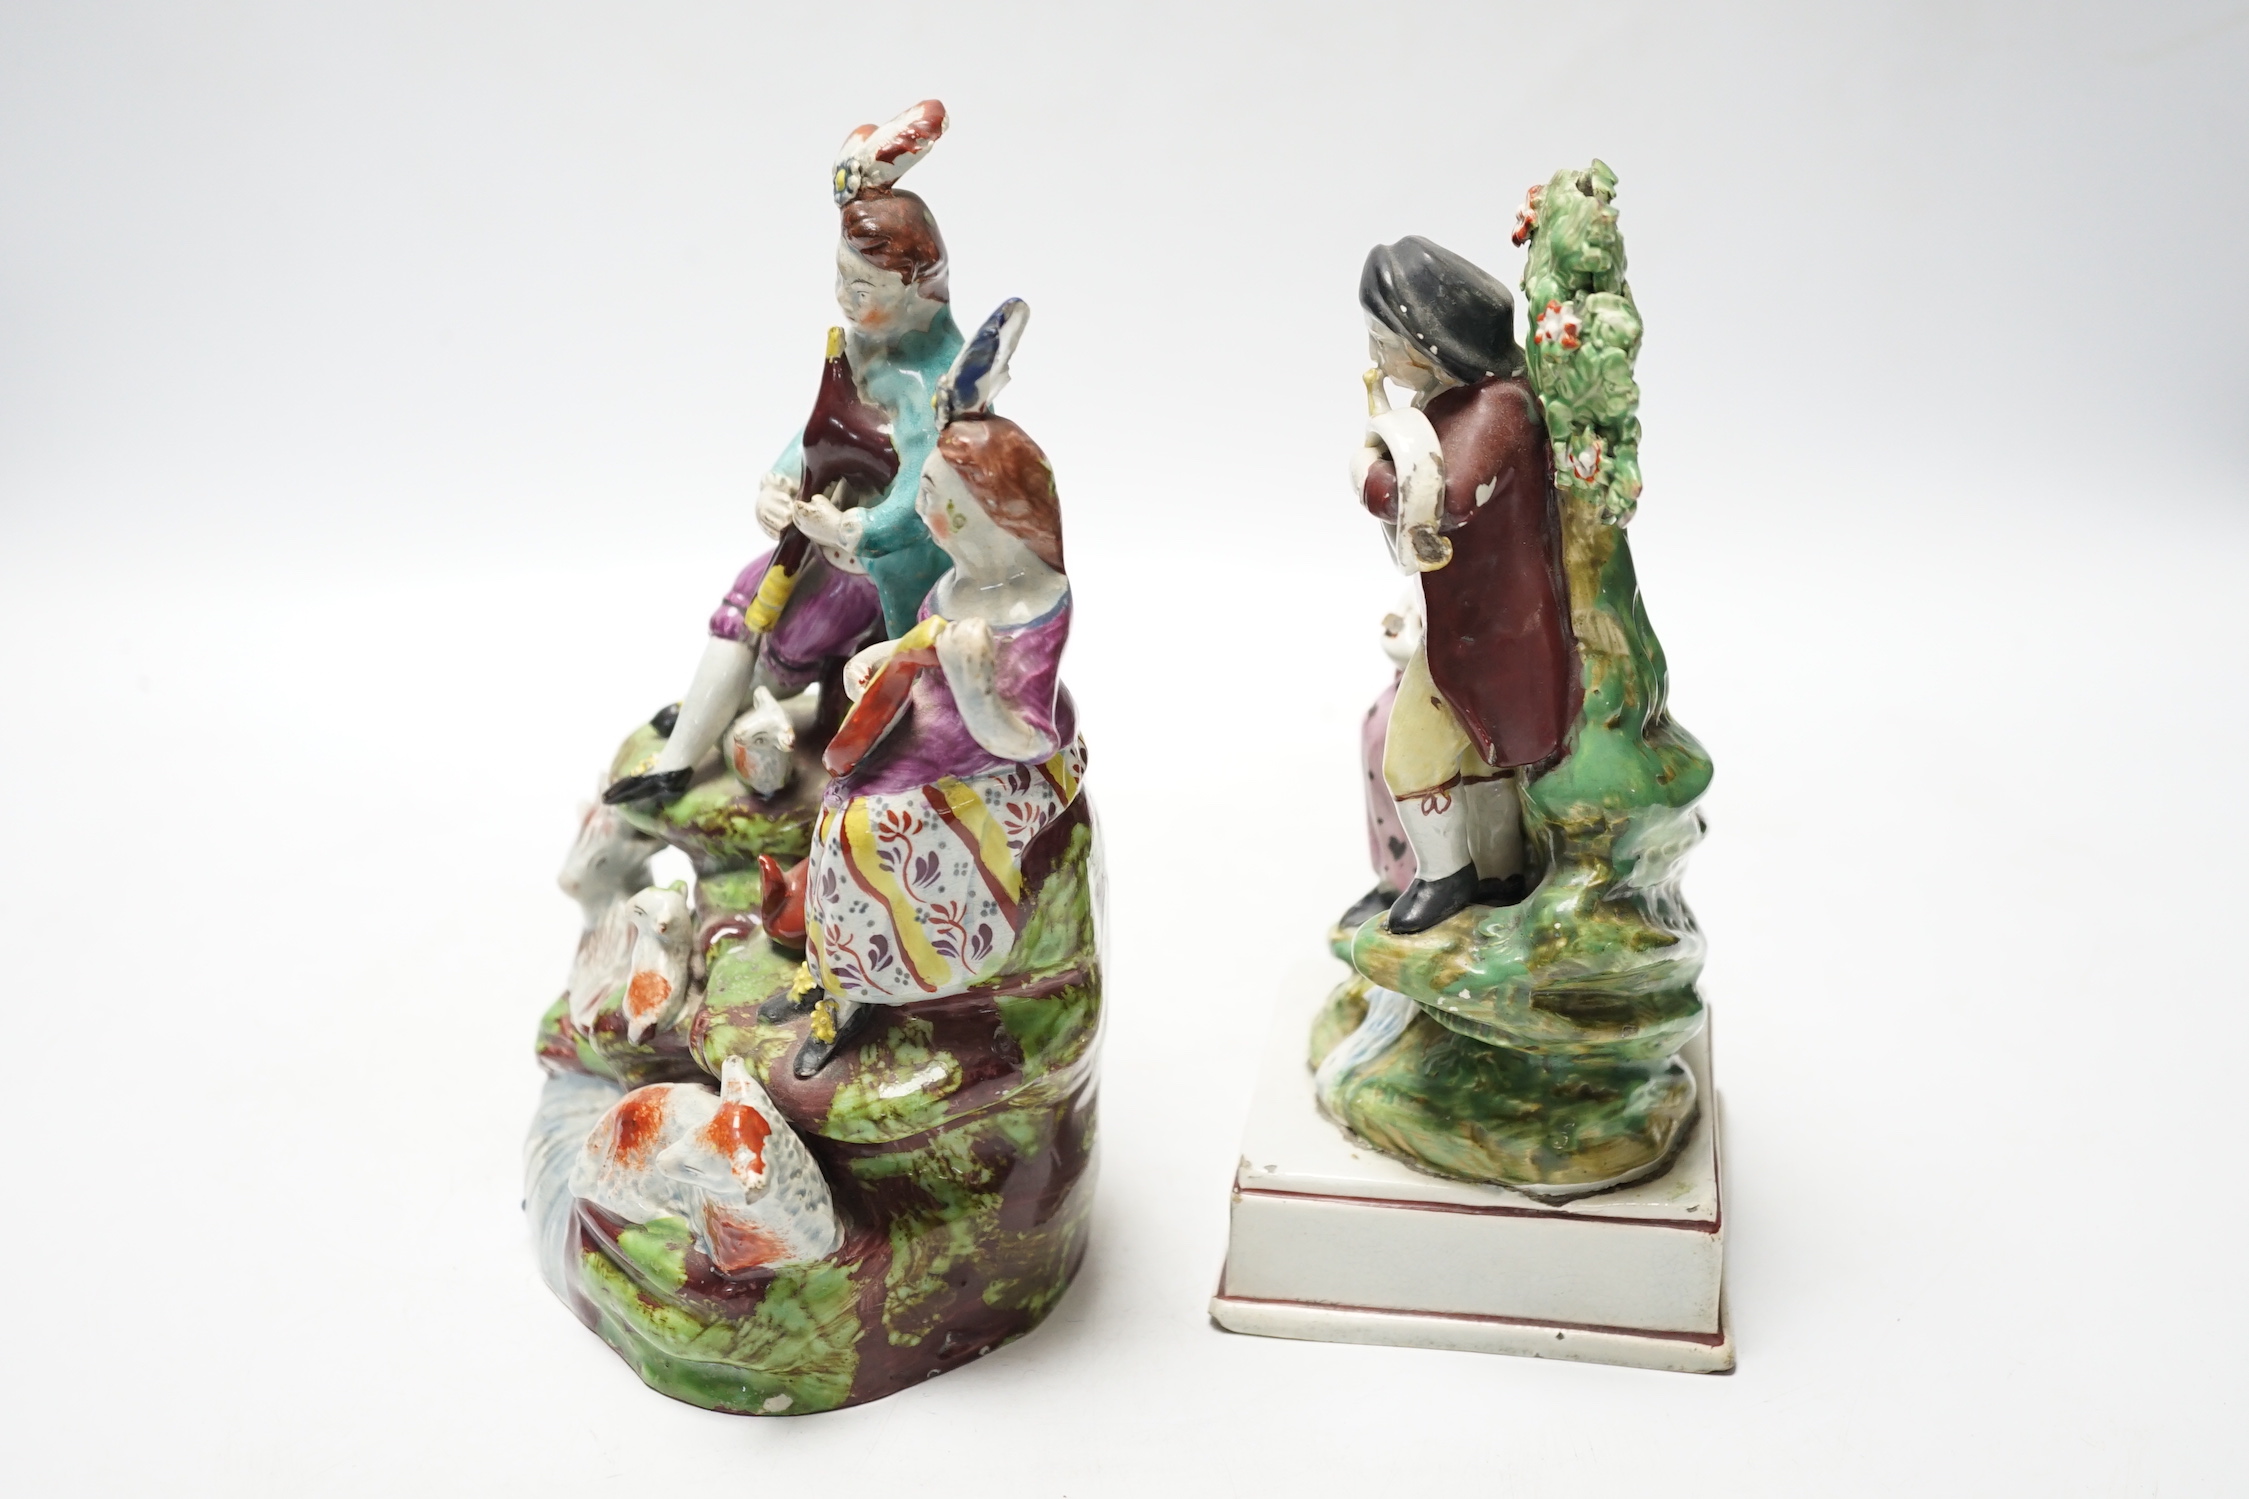 Two Staffordshire pearlware groups of musicians, c.1810-25, largest 20cm high